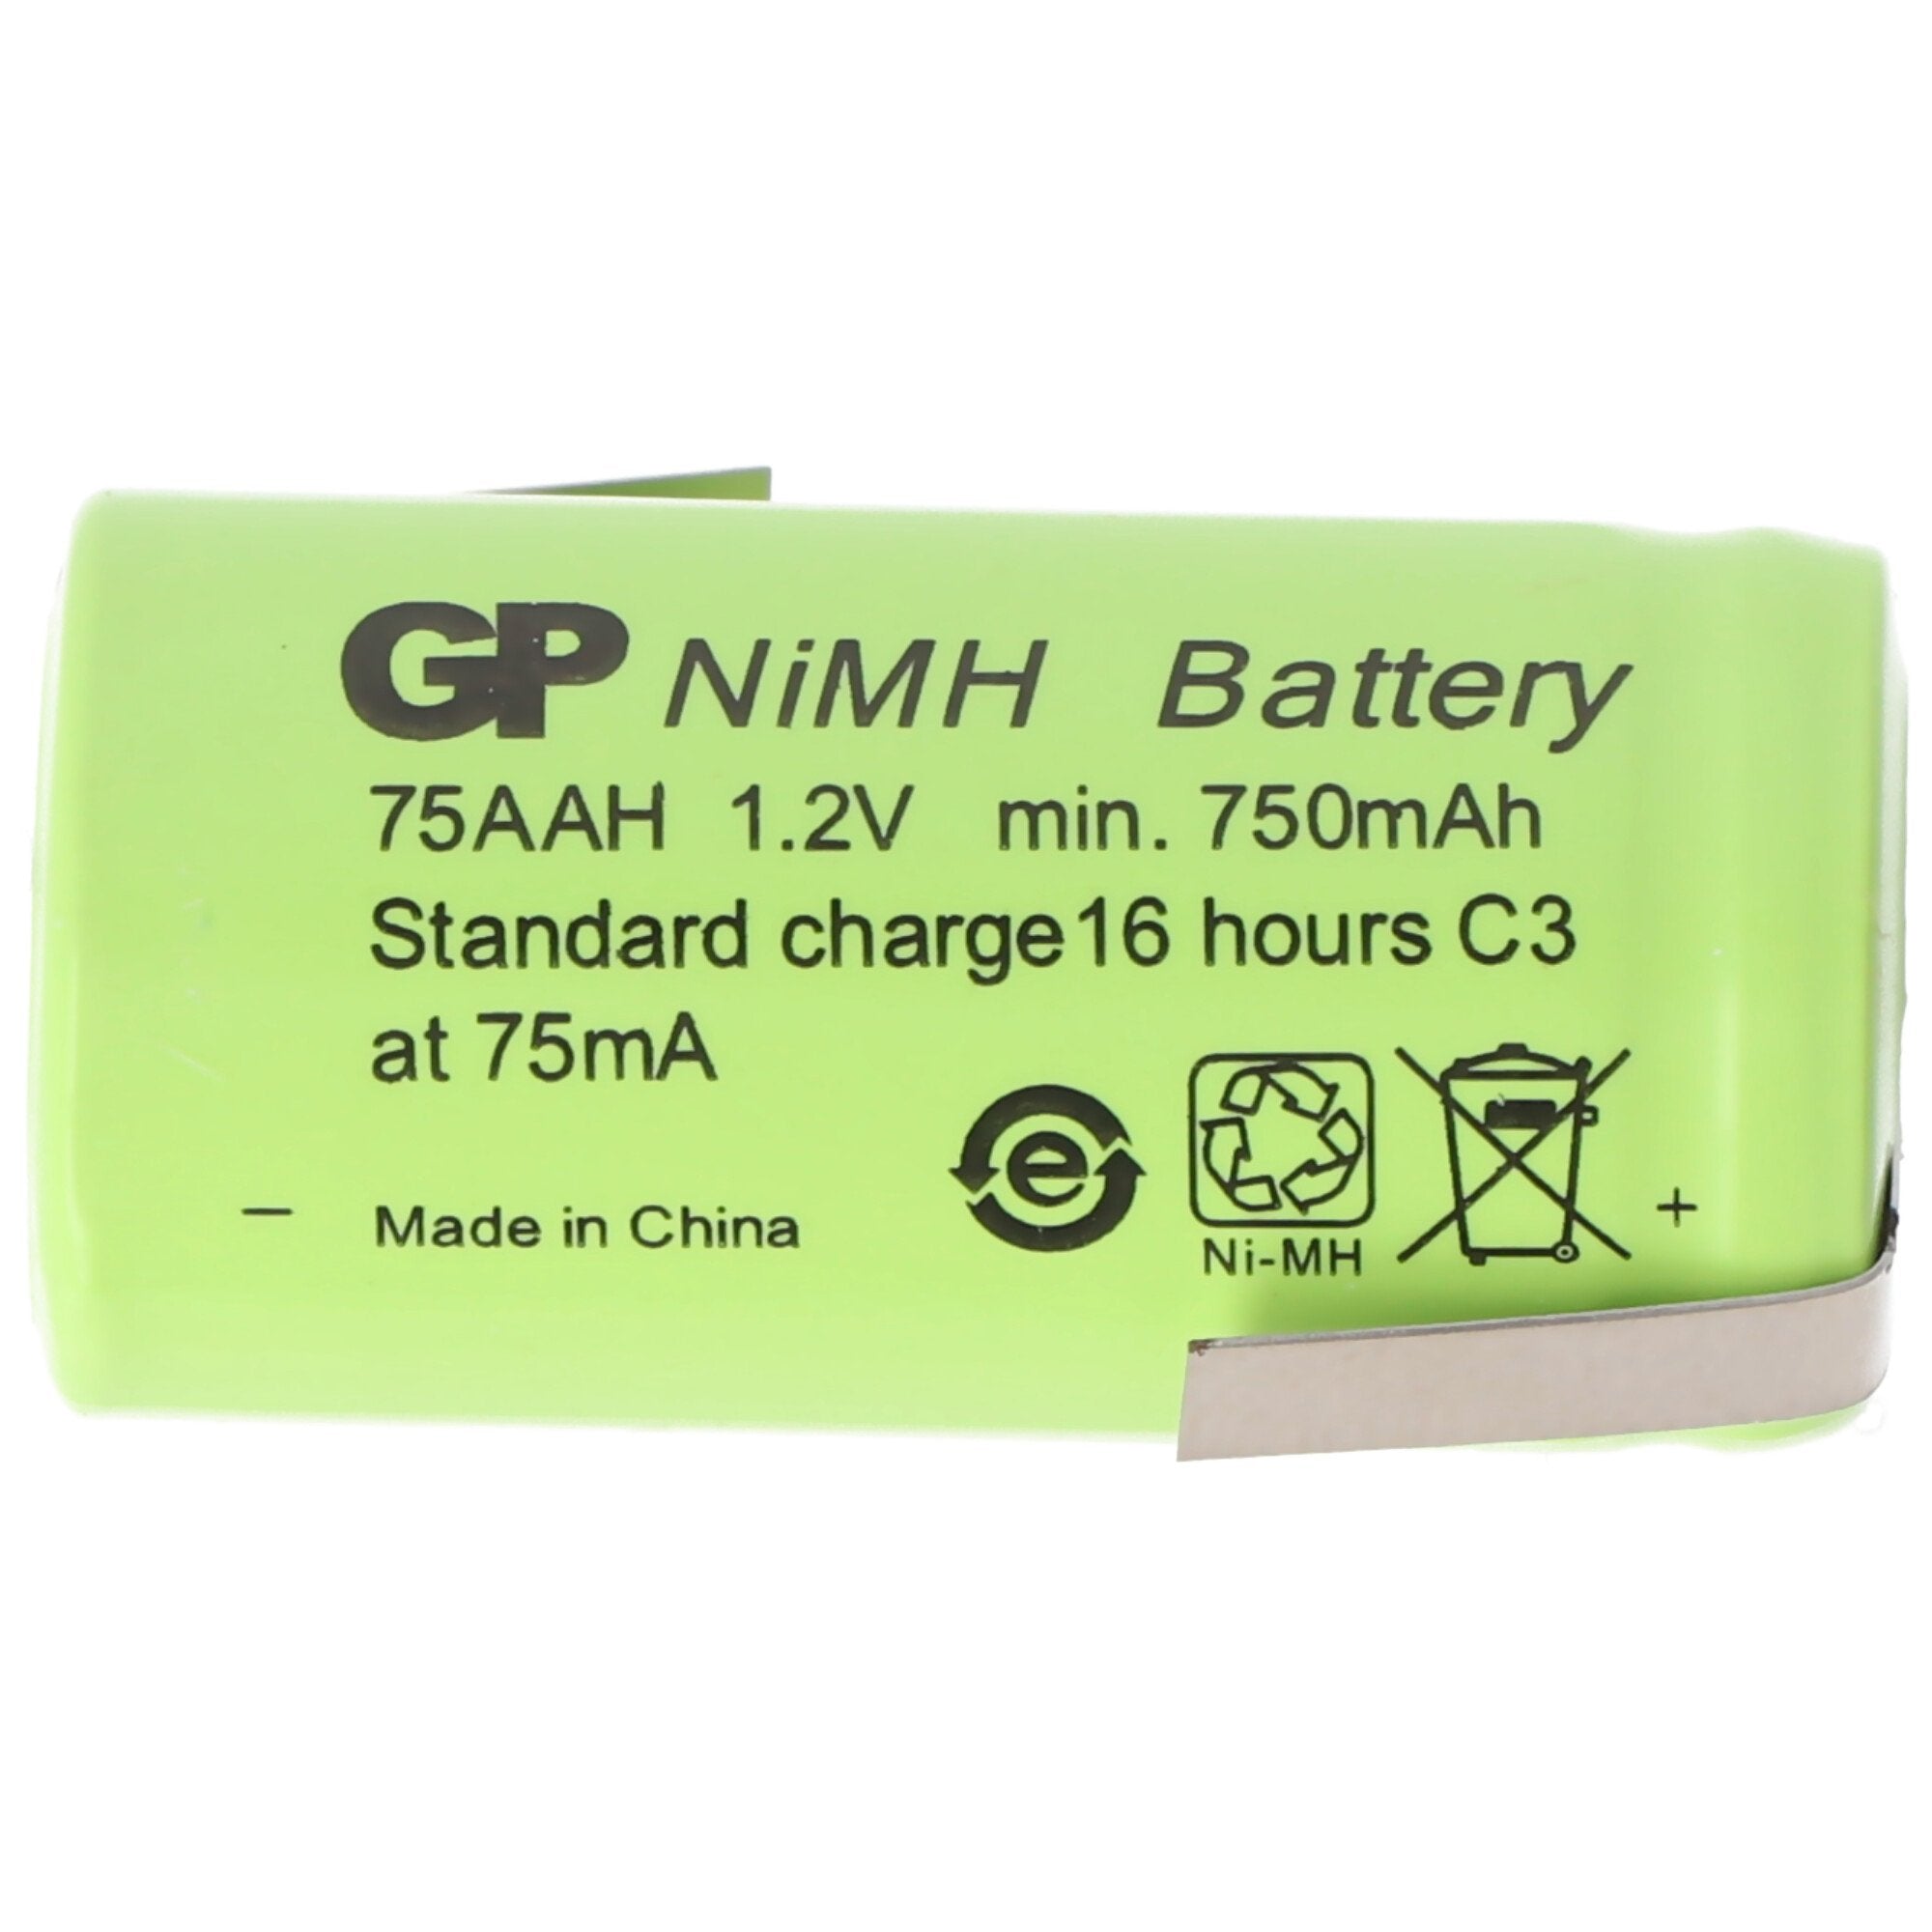 Battery 2 / 3AA NiMH battery with soldering tag Z-shape 650mAh